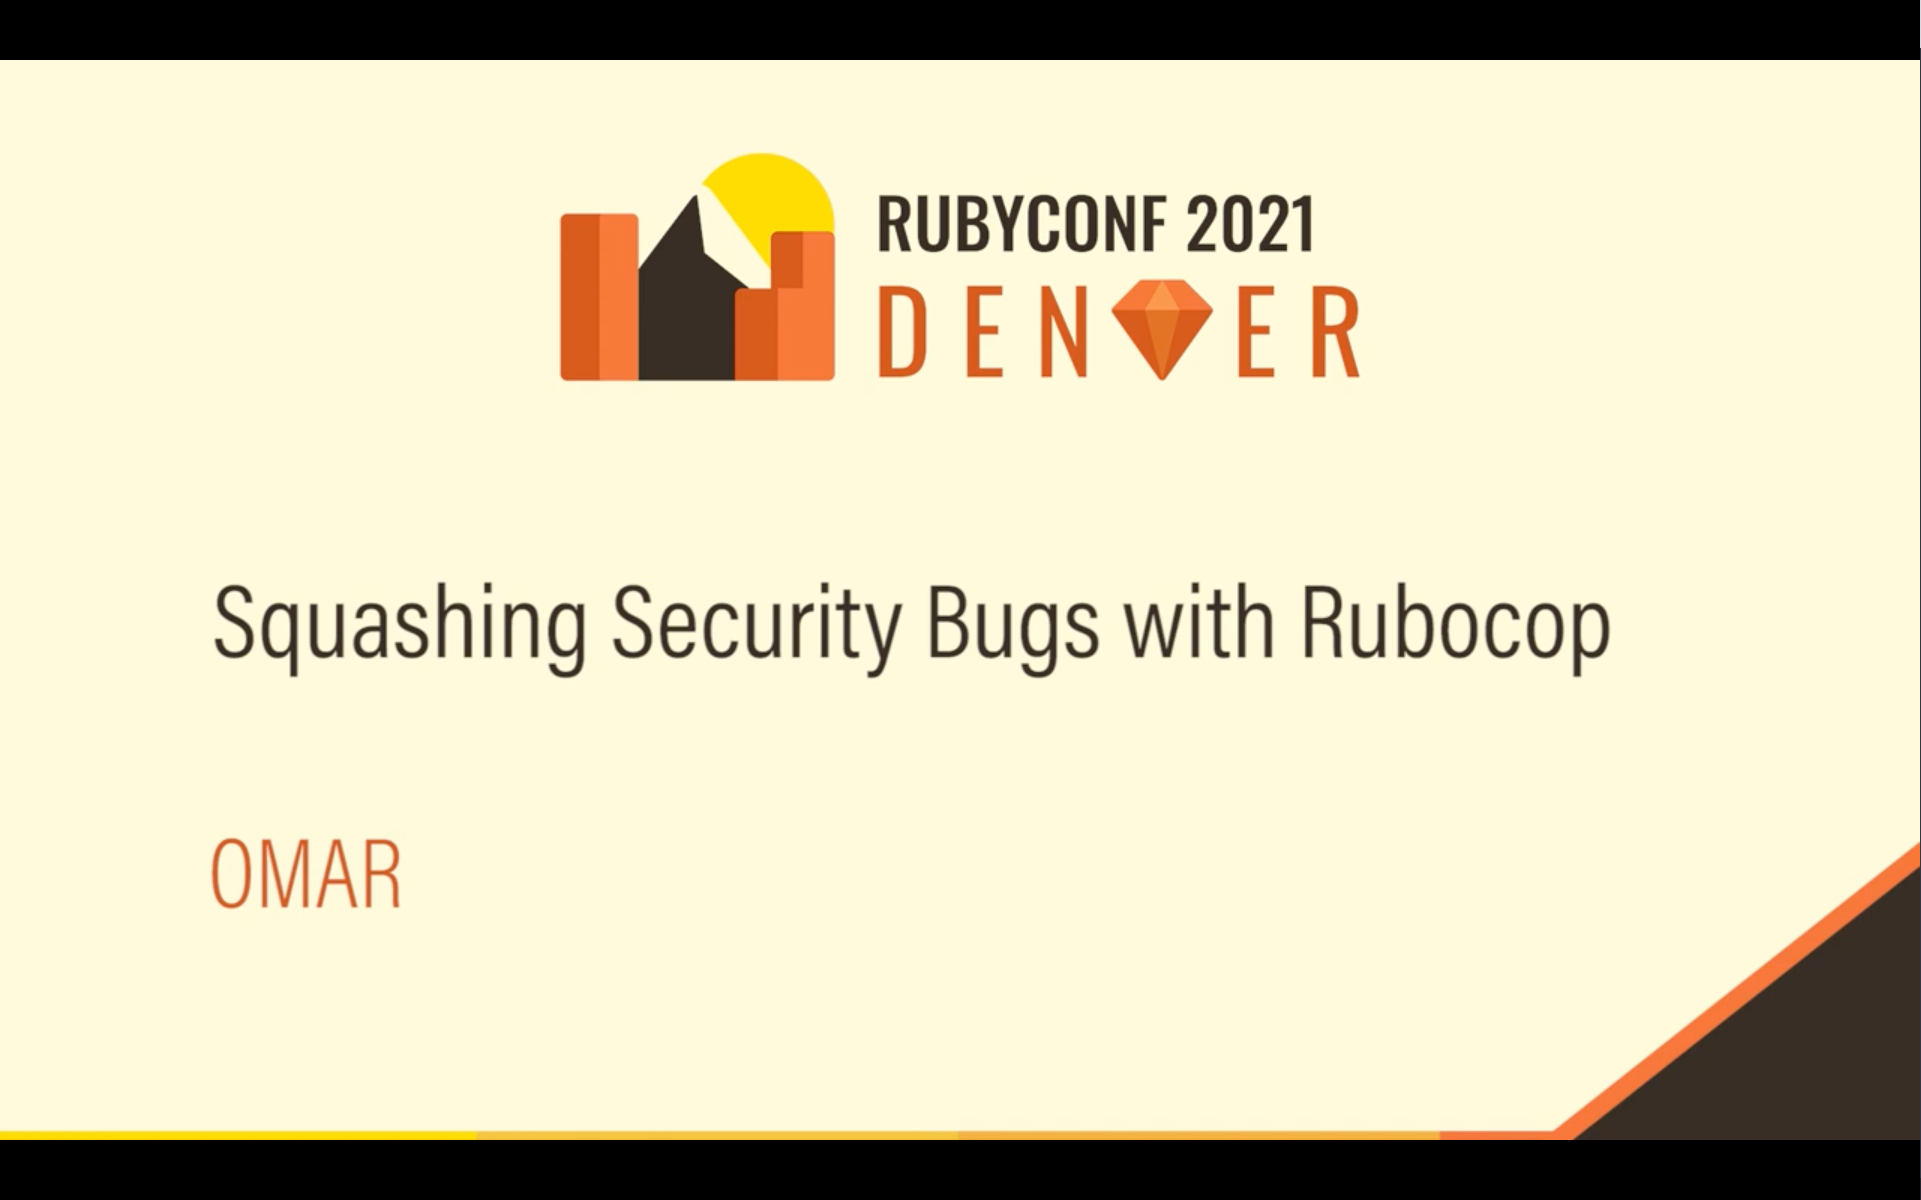 Squashing Security Bugs with Rubocop link